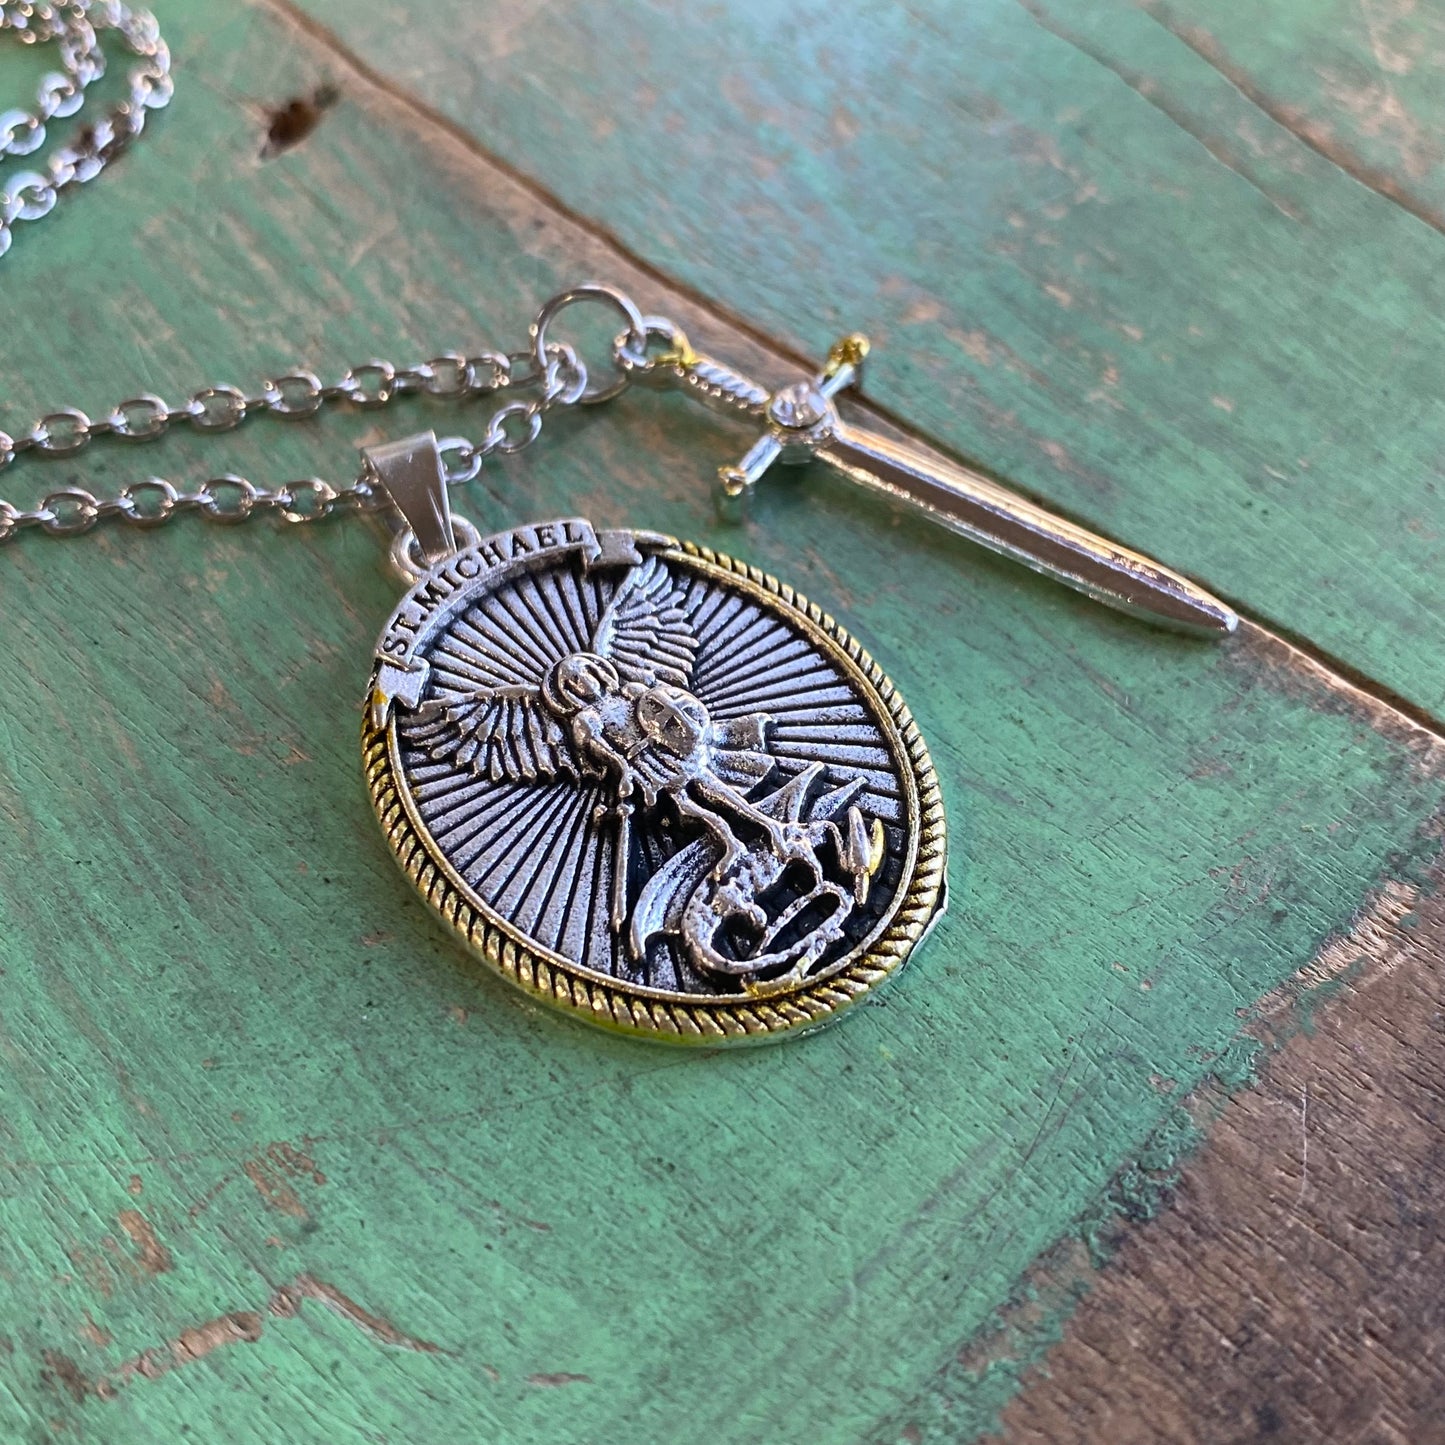 Sword of St Michael Necklace